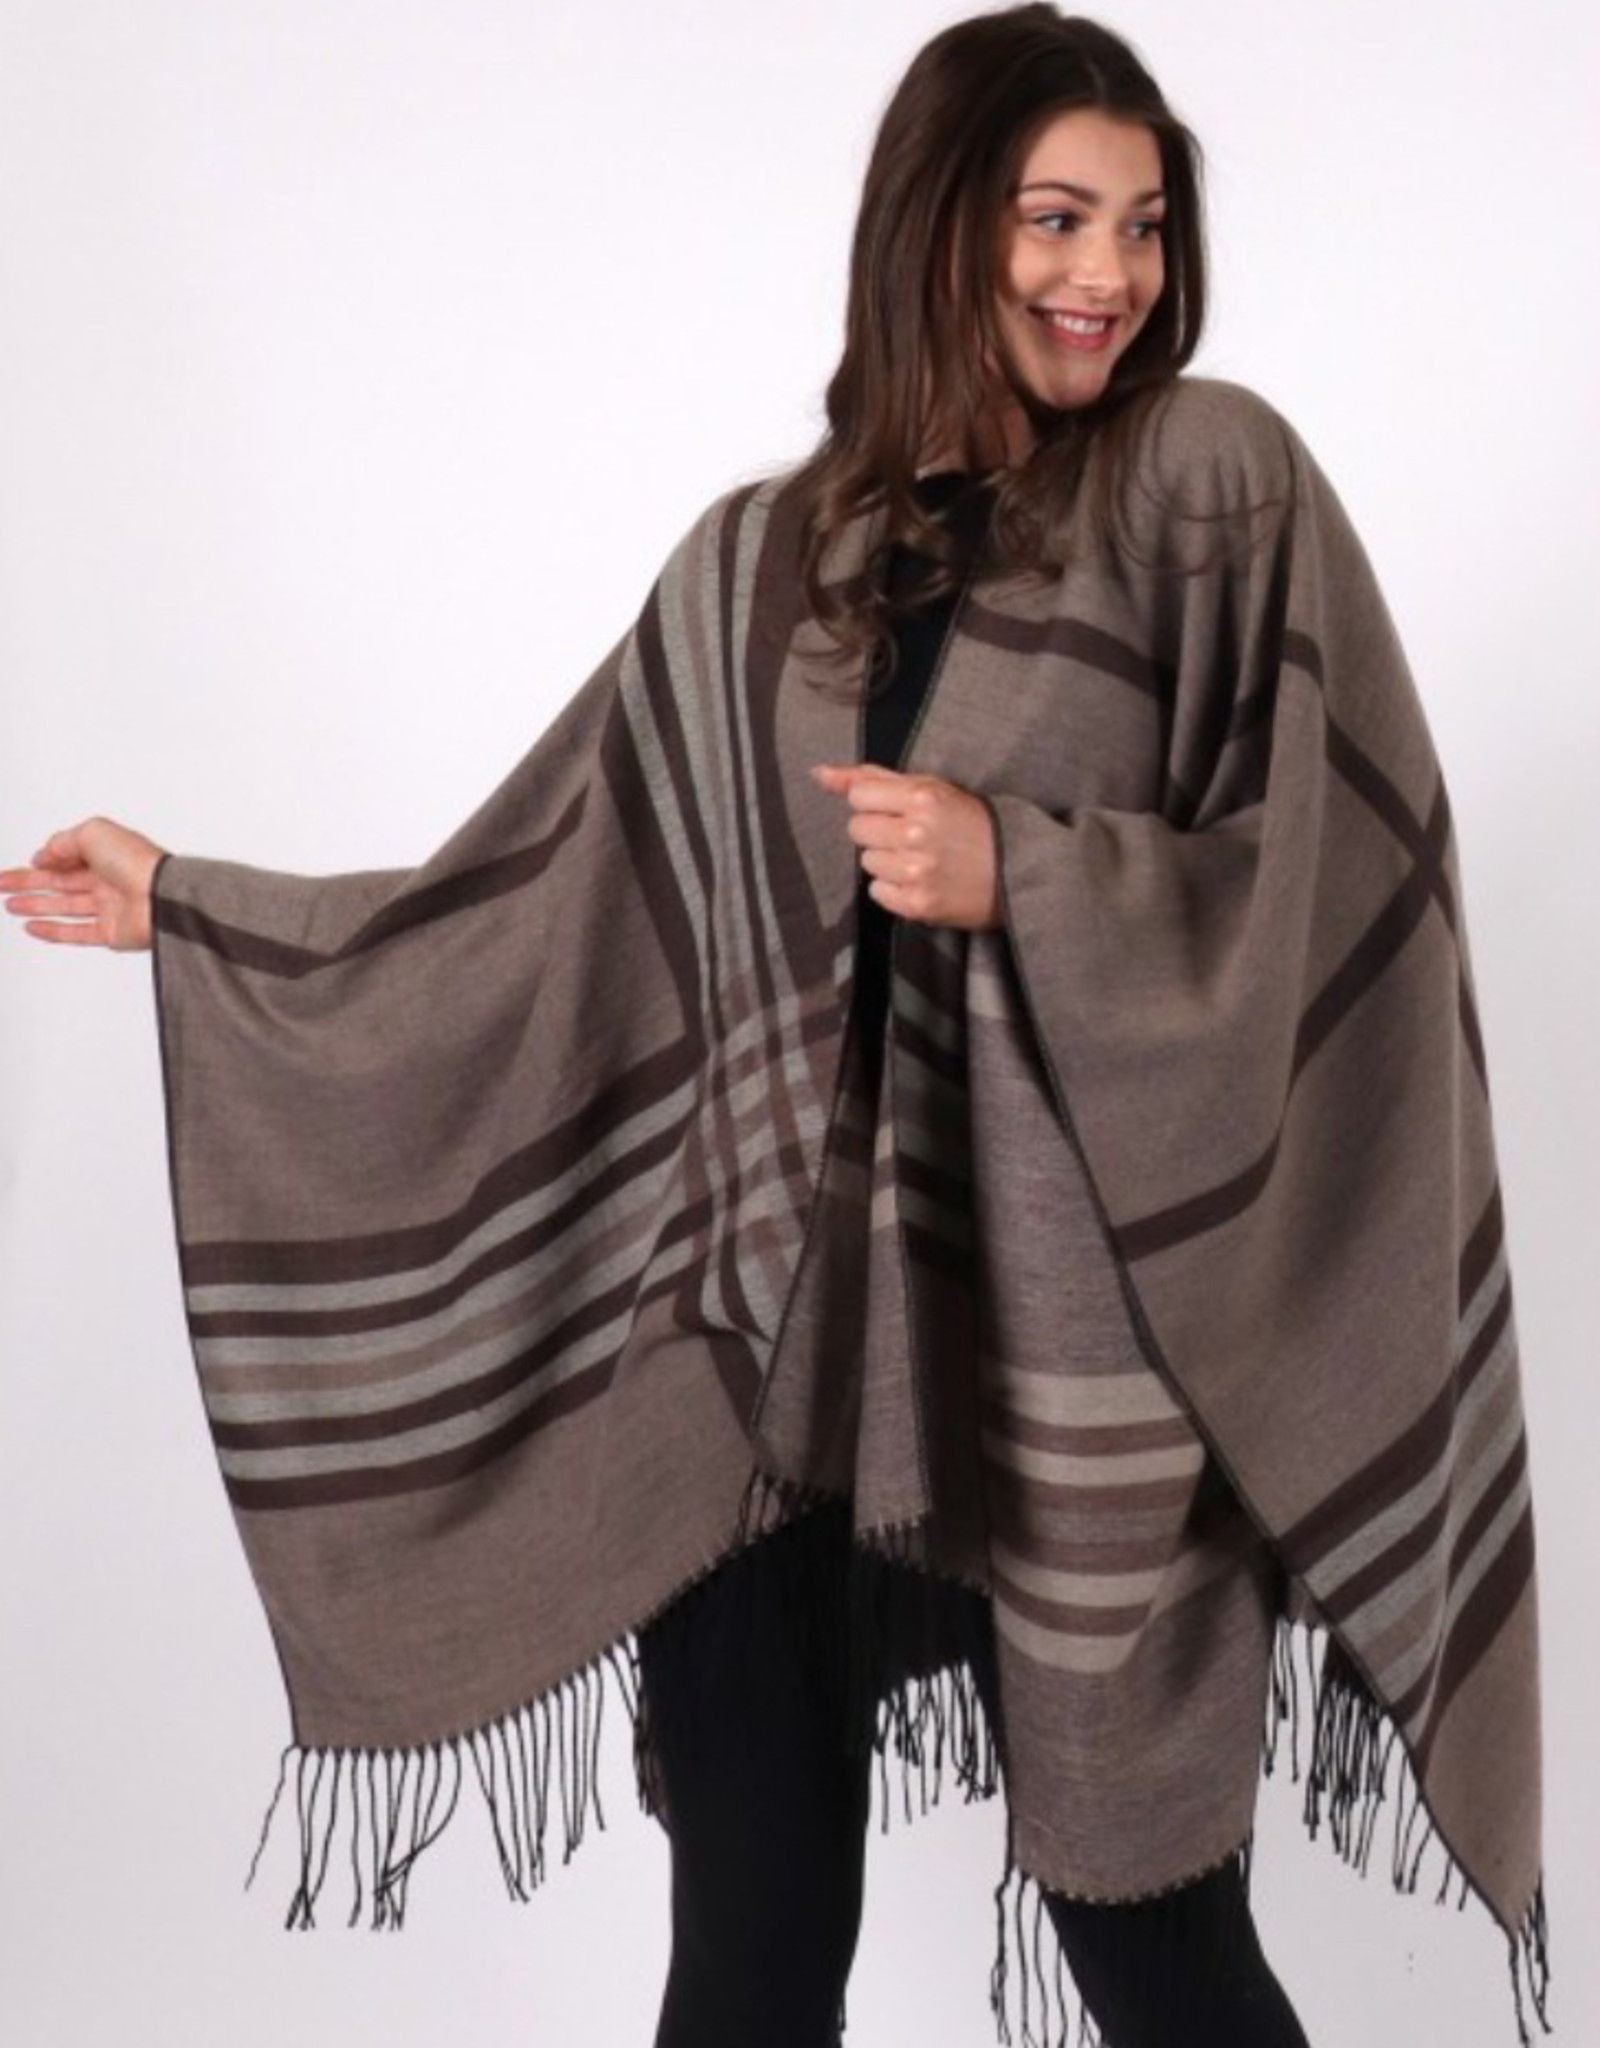 Cherie Bliss Plaid Patterned Shawl with Fringe